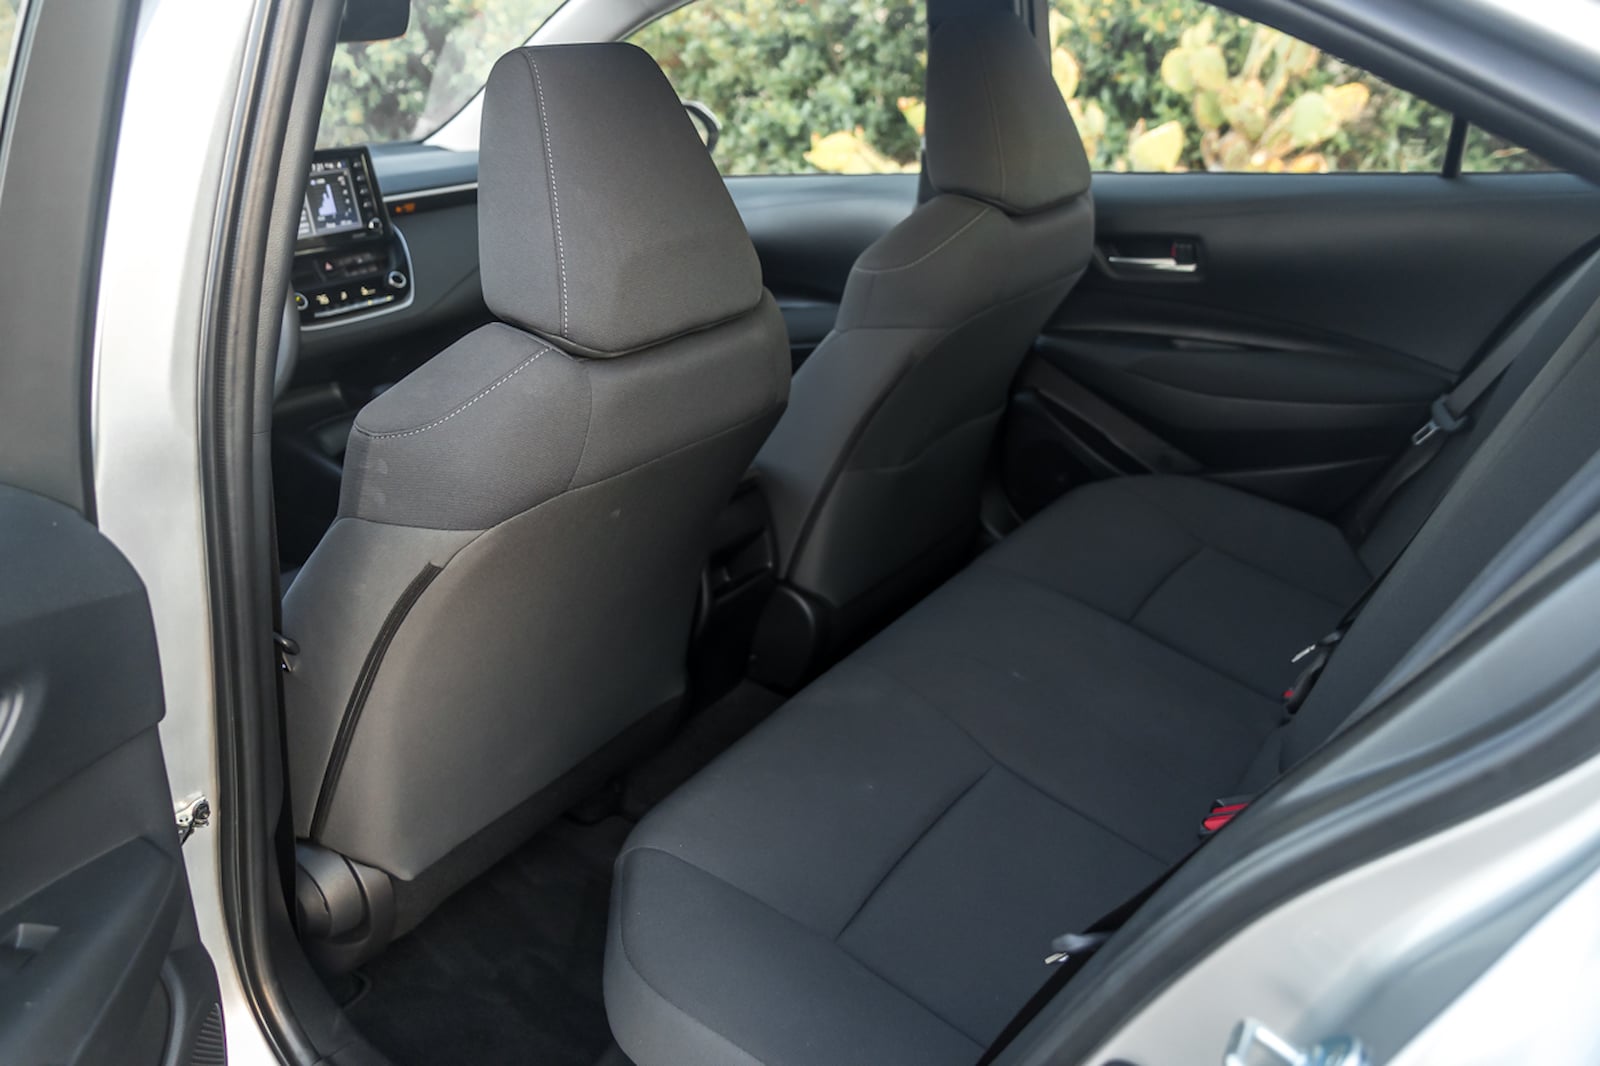 Why Don't All Full-Size Sedans Have Fold-Down Rear Seats?